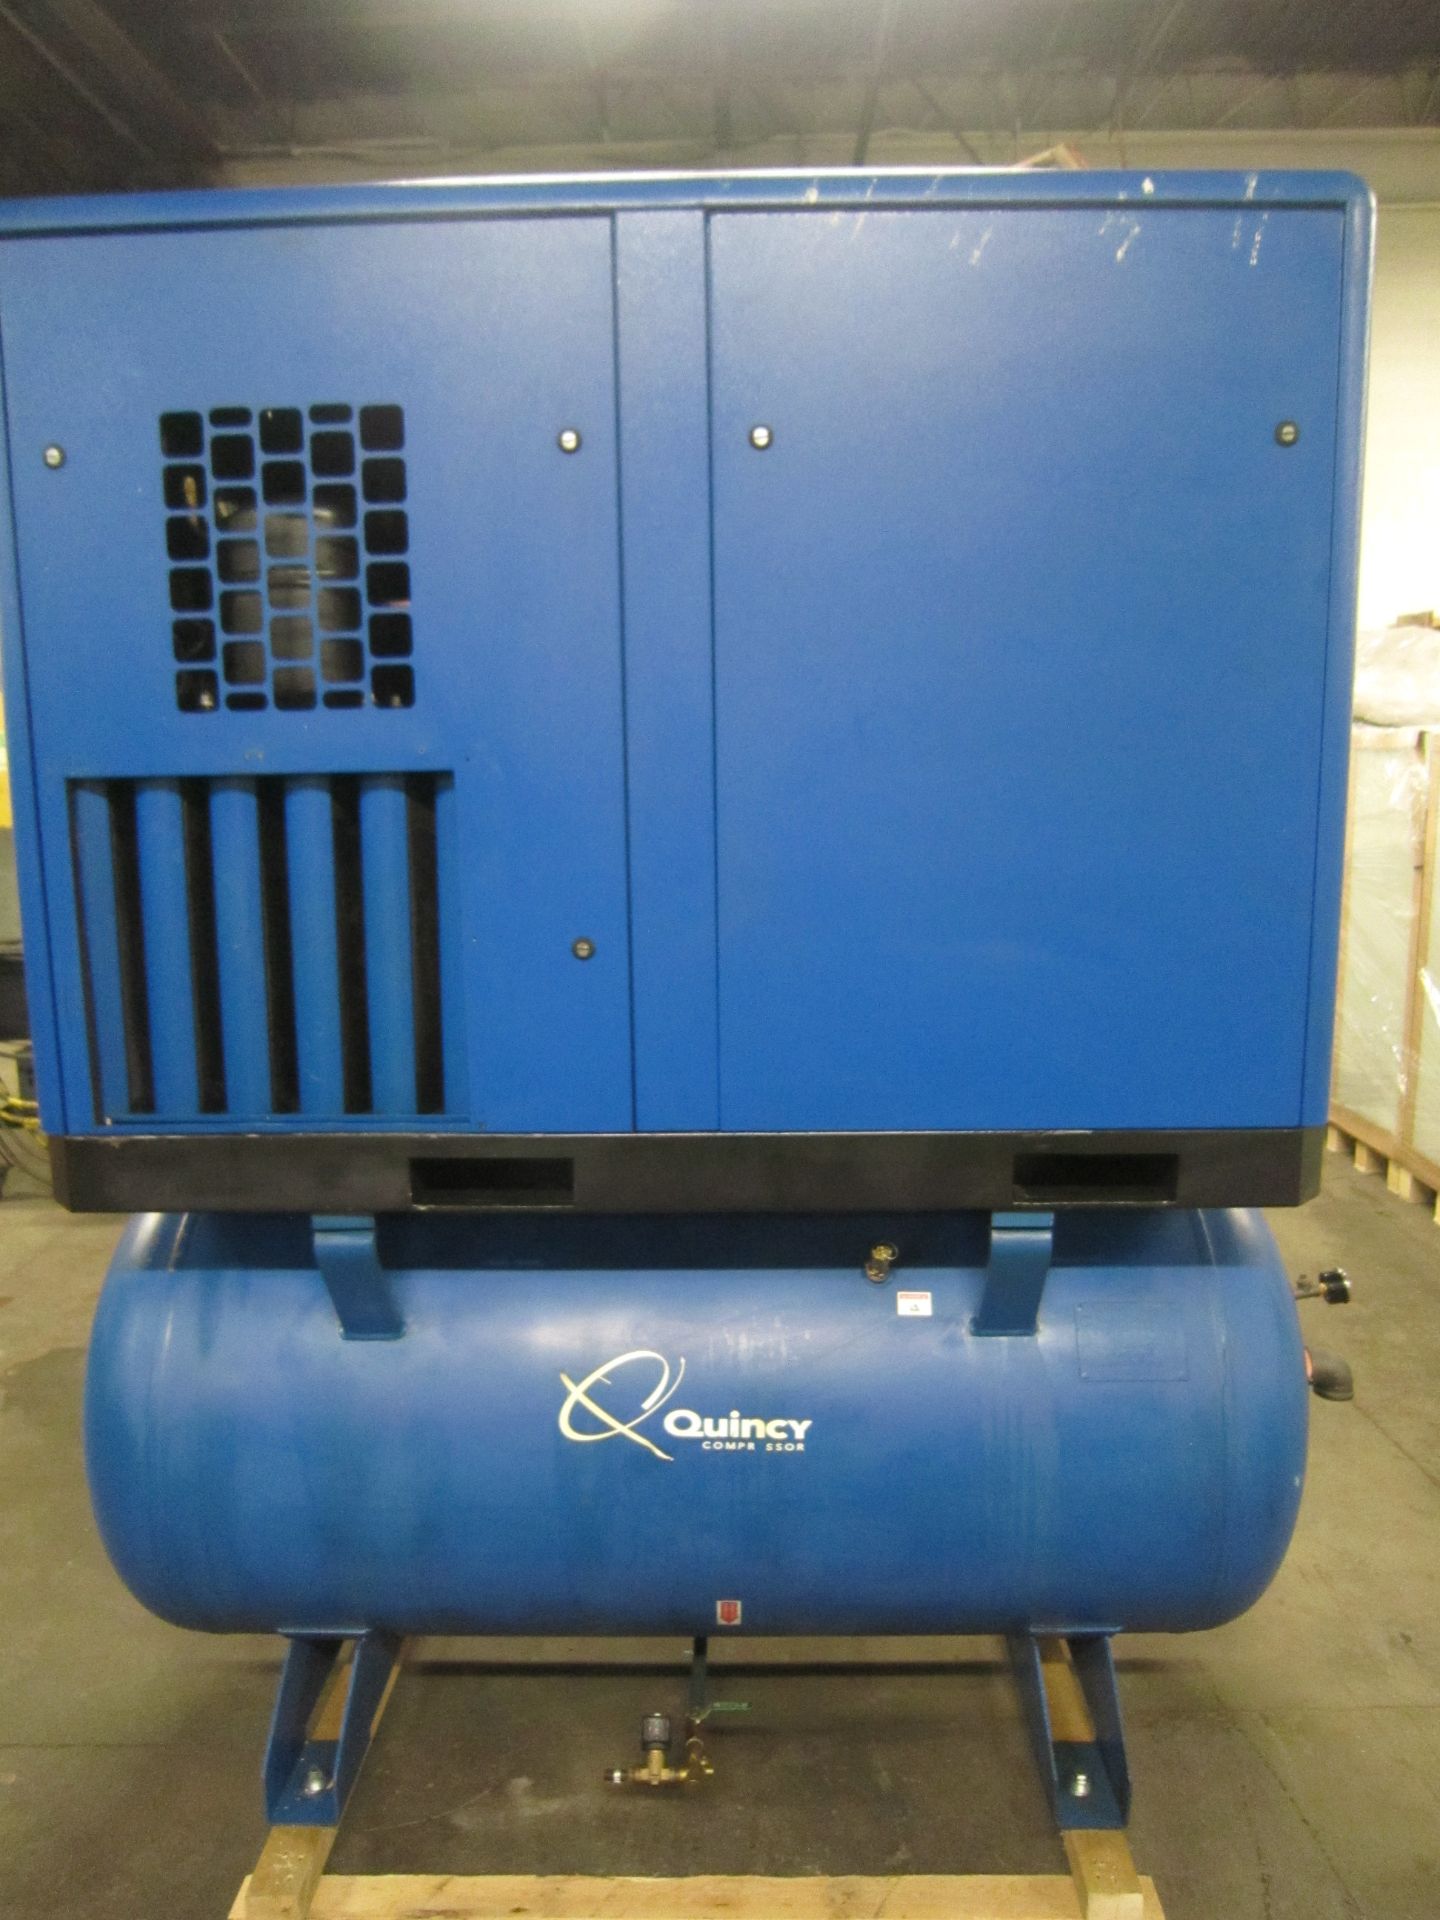 2006 Quincy 30HP Rotary Screw Air Compressor - 3 phase with horizontal pressurized tank